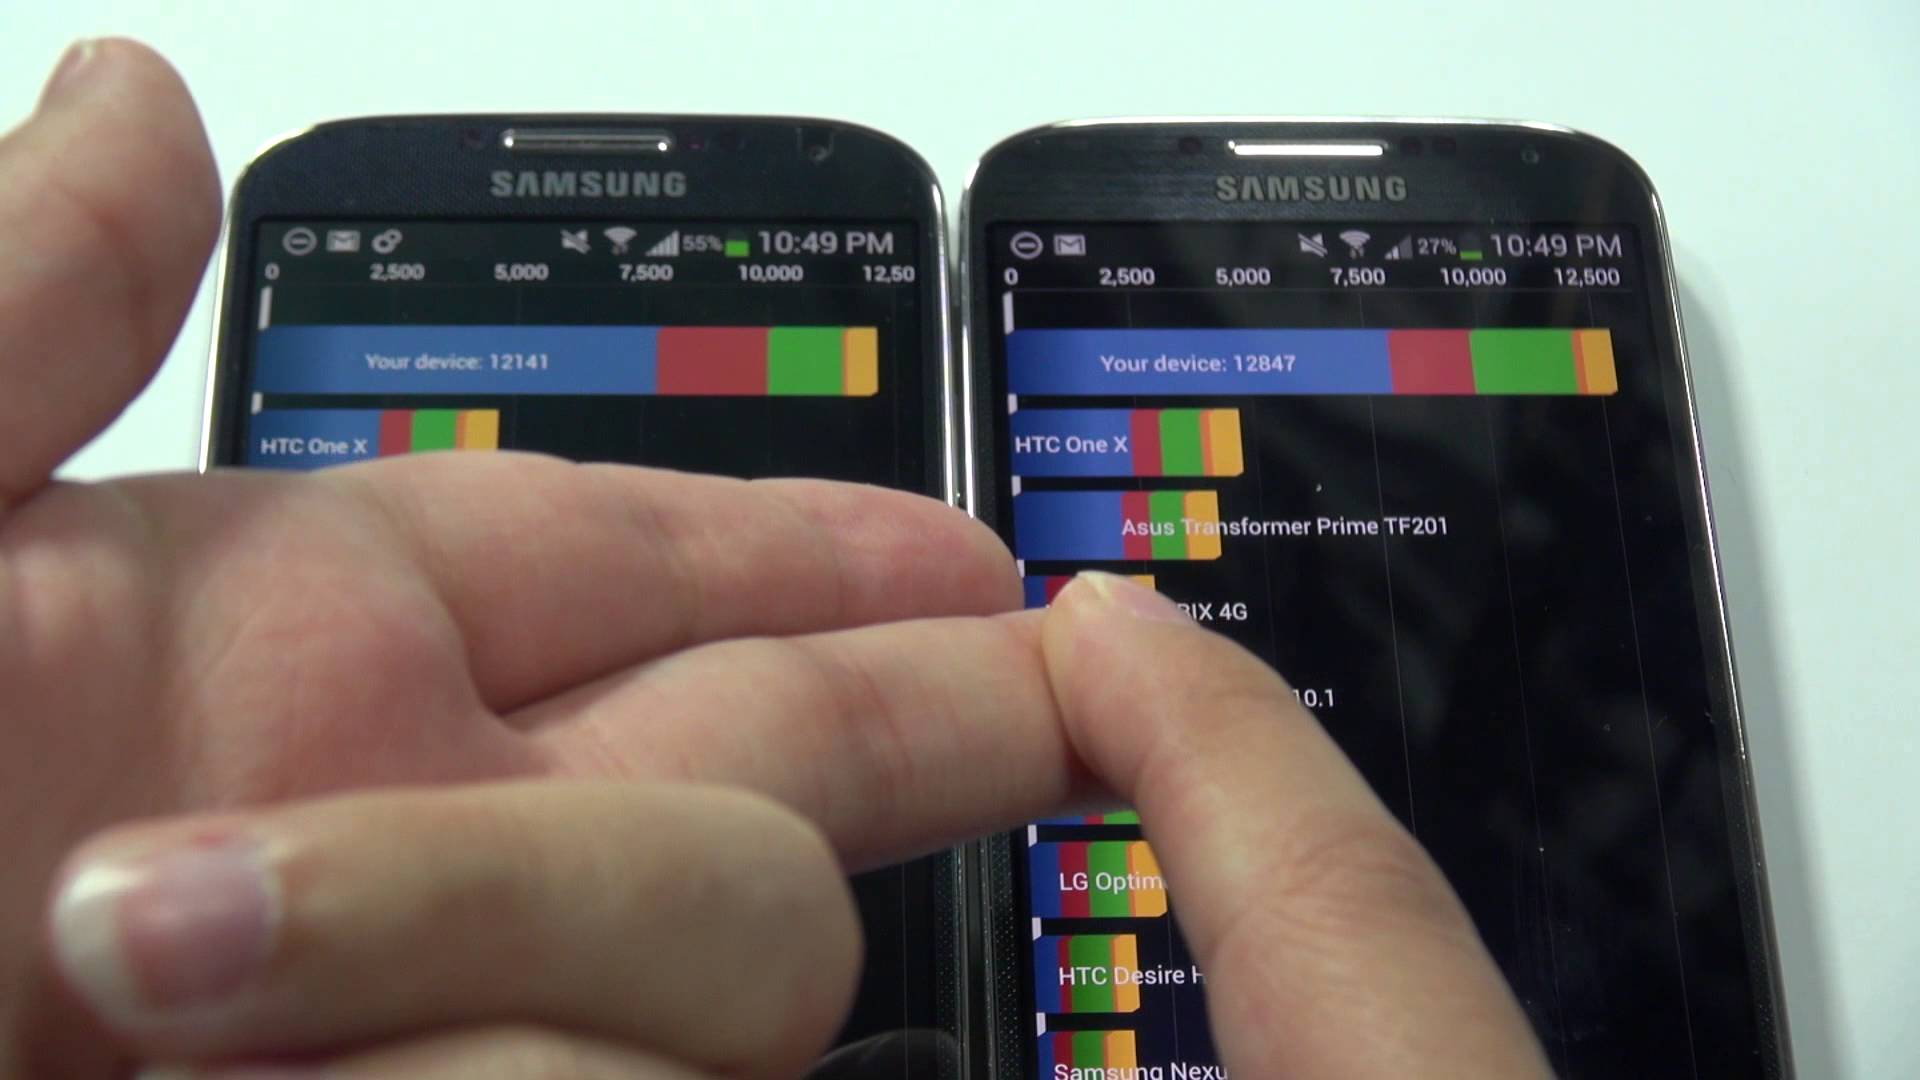 Galaxy S4 Exynos vs Snapdragon: Which is Best?